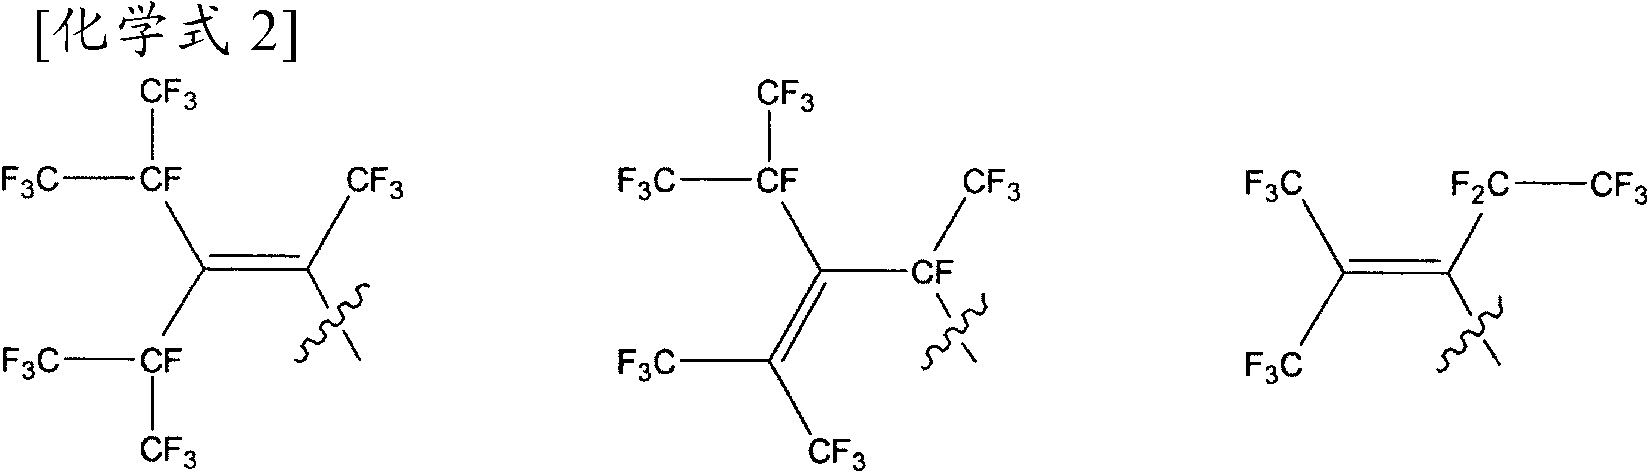 Agent for imparting antifouling properties